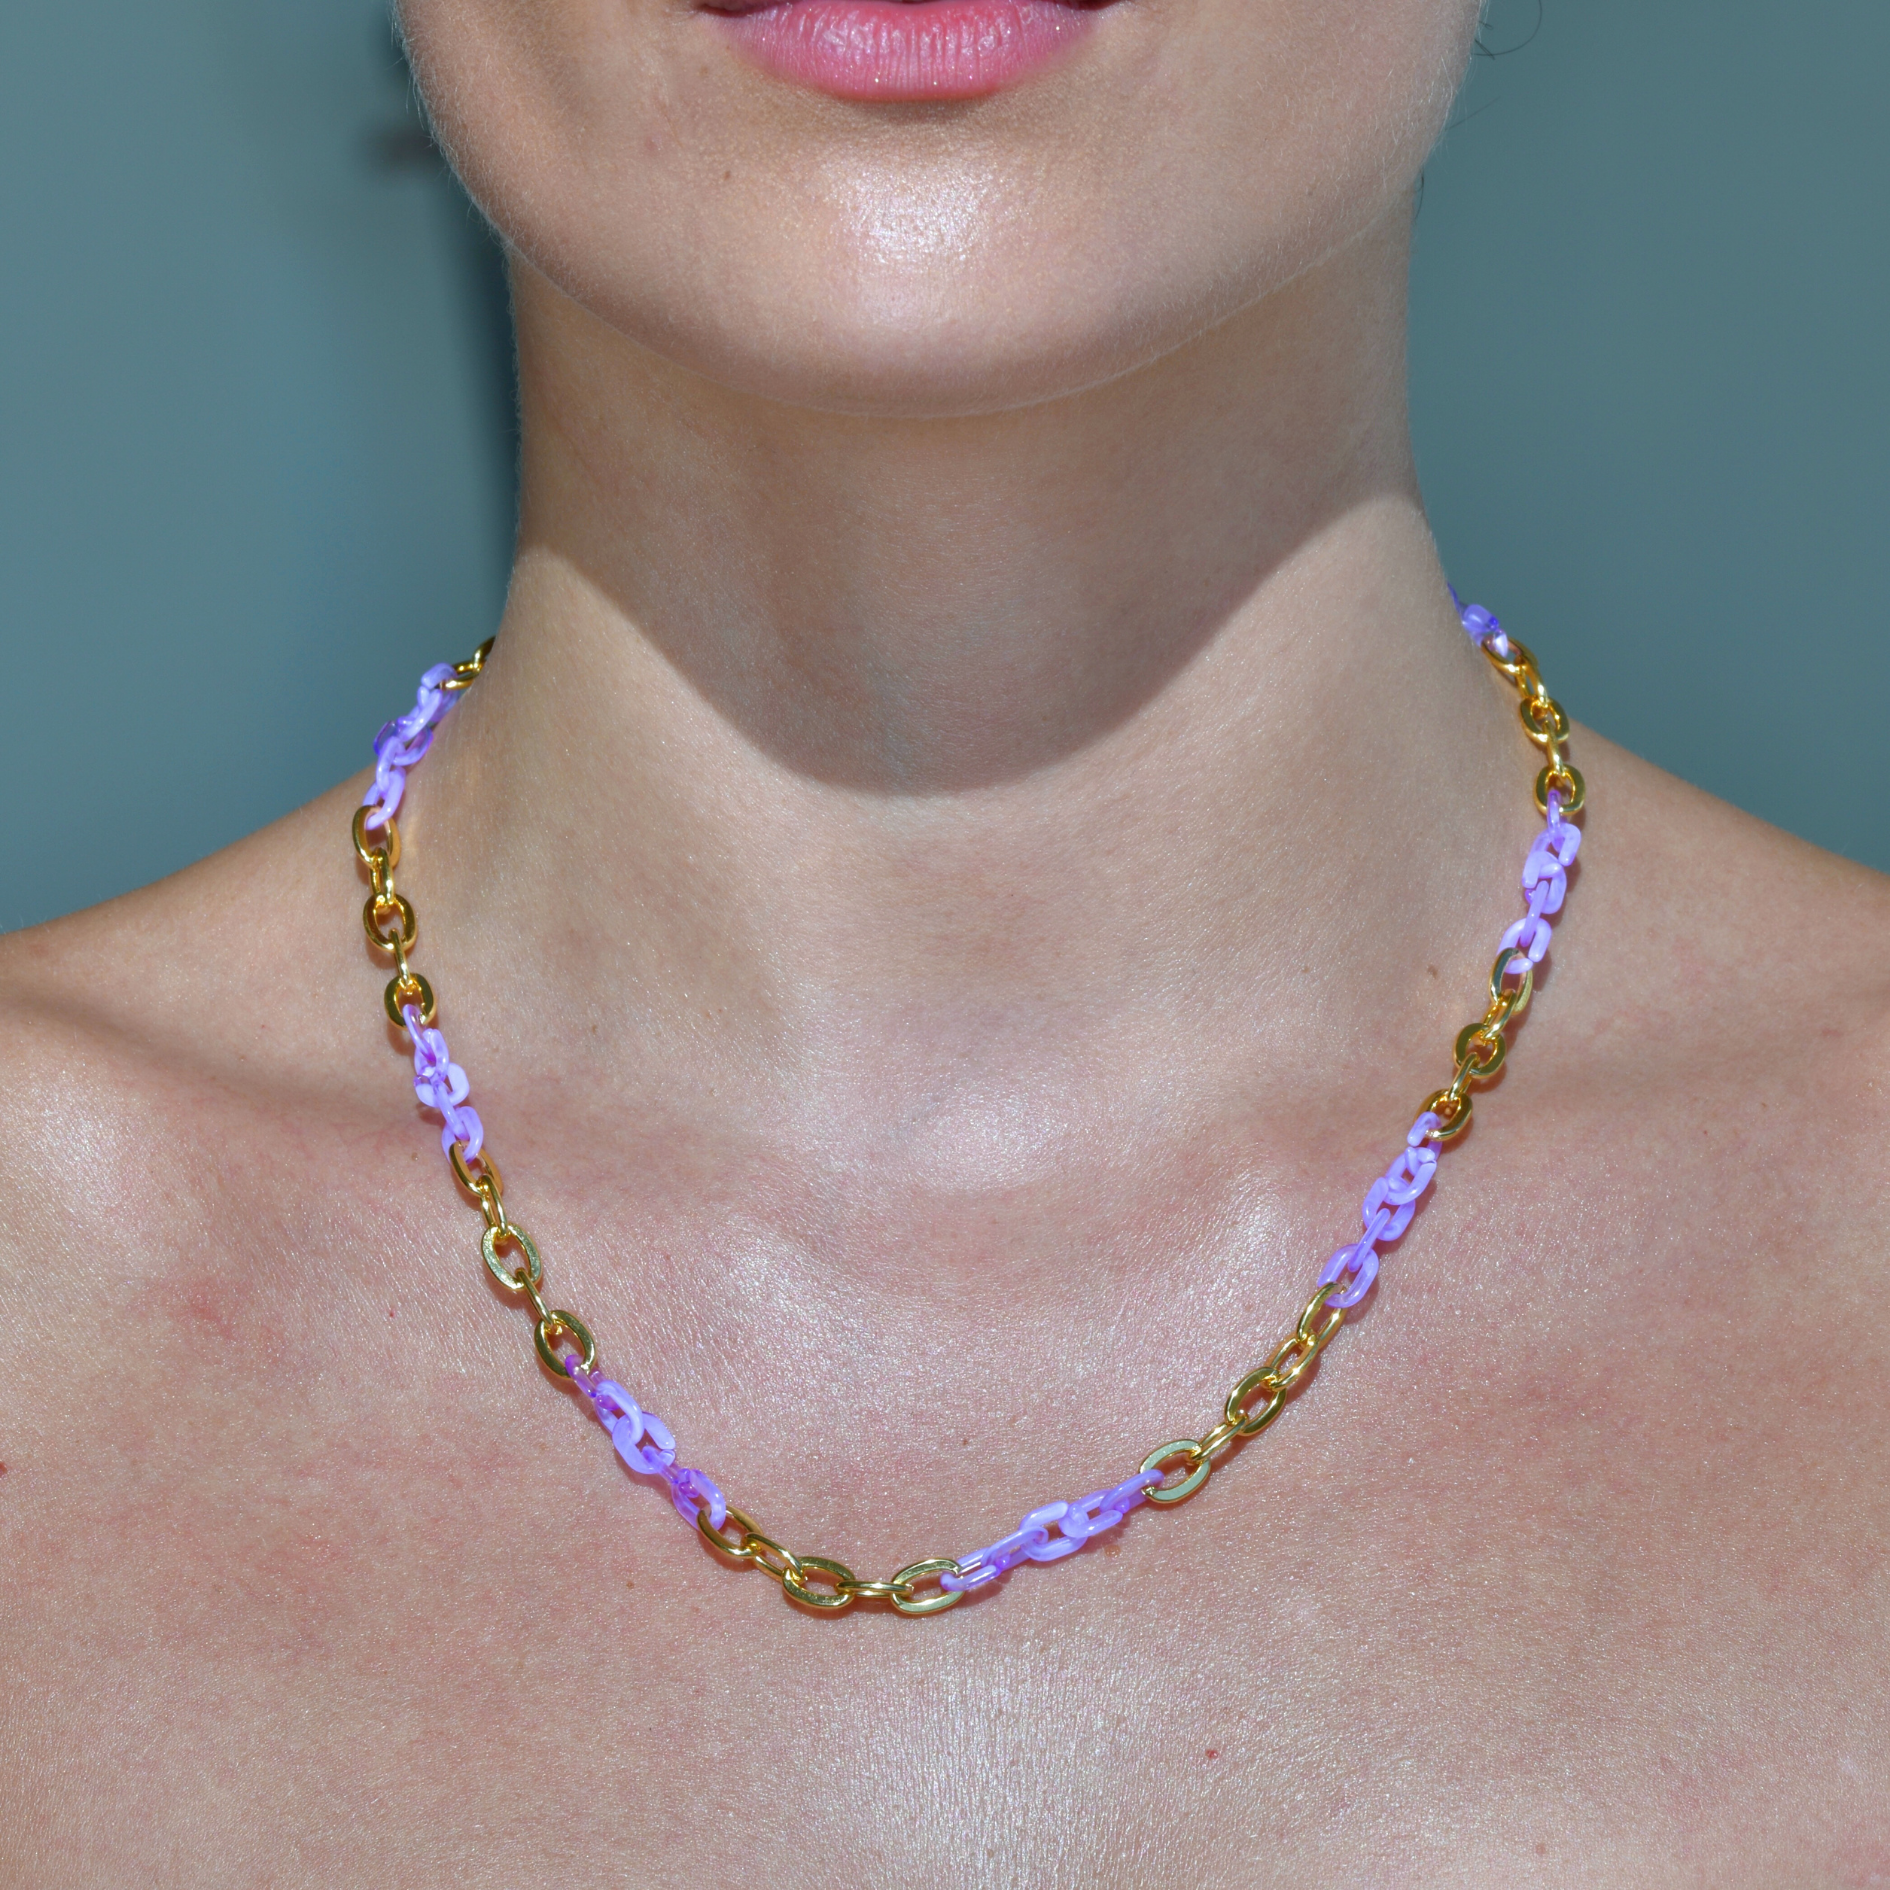 Gold plated chain necklace. The chain is composed by lilac chain parts and gold chain parts